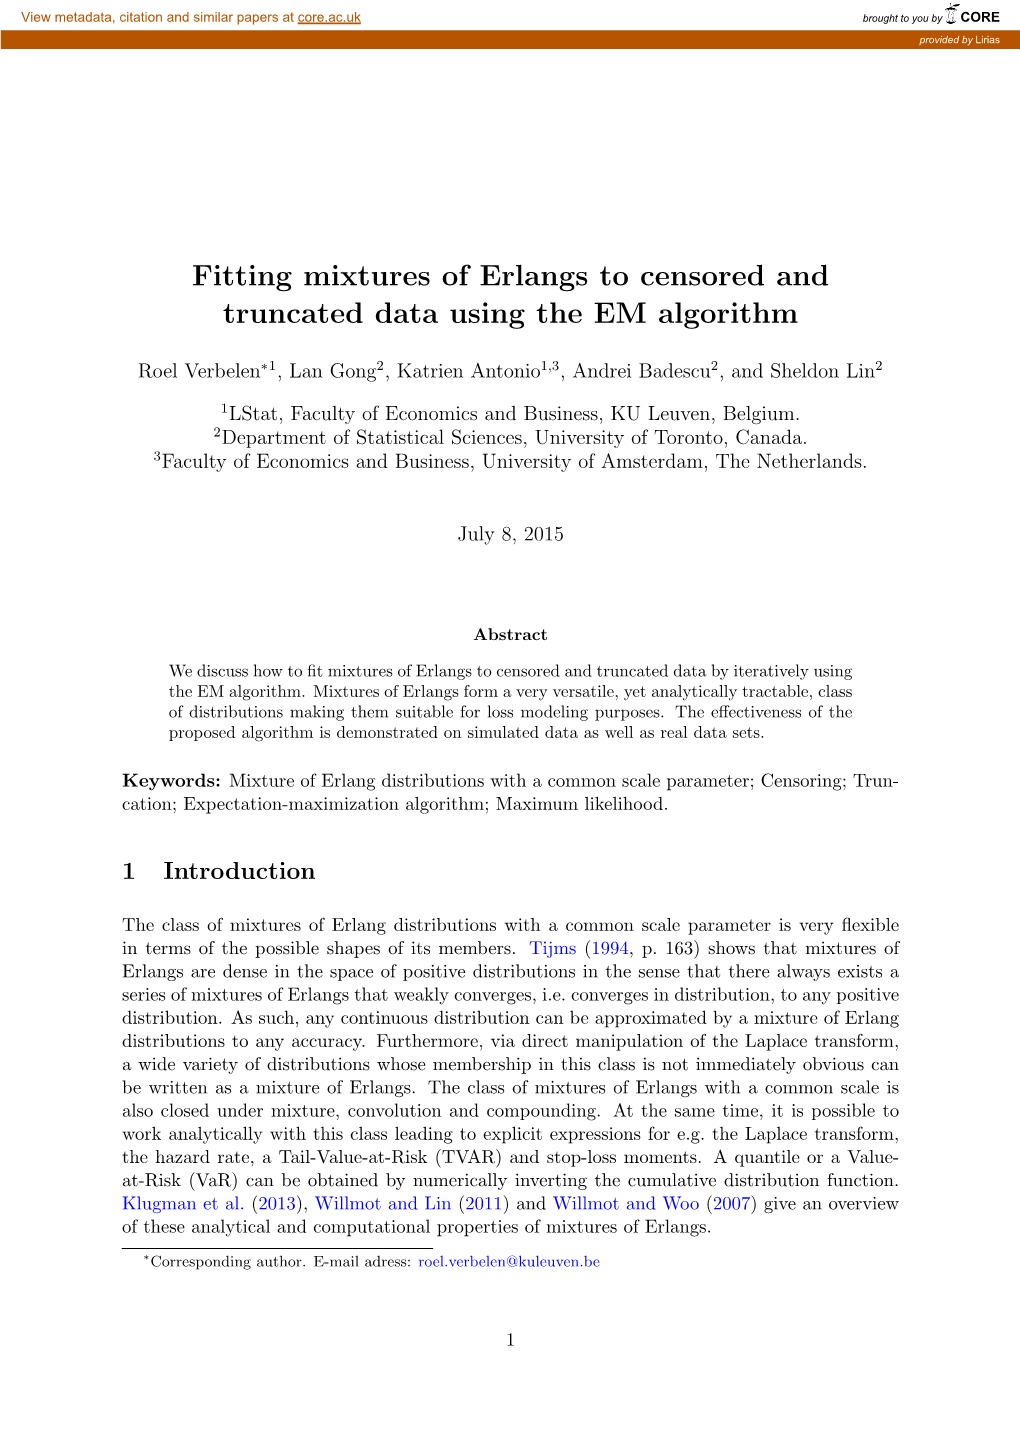 Fitting Mixtures of Erlangs to Censored and Truncated Data Using the EM Algorithm